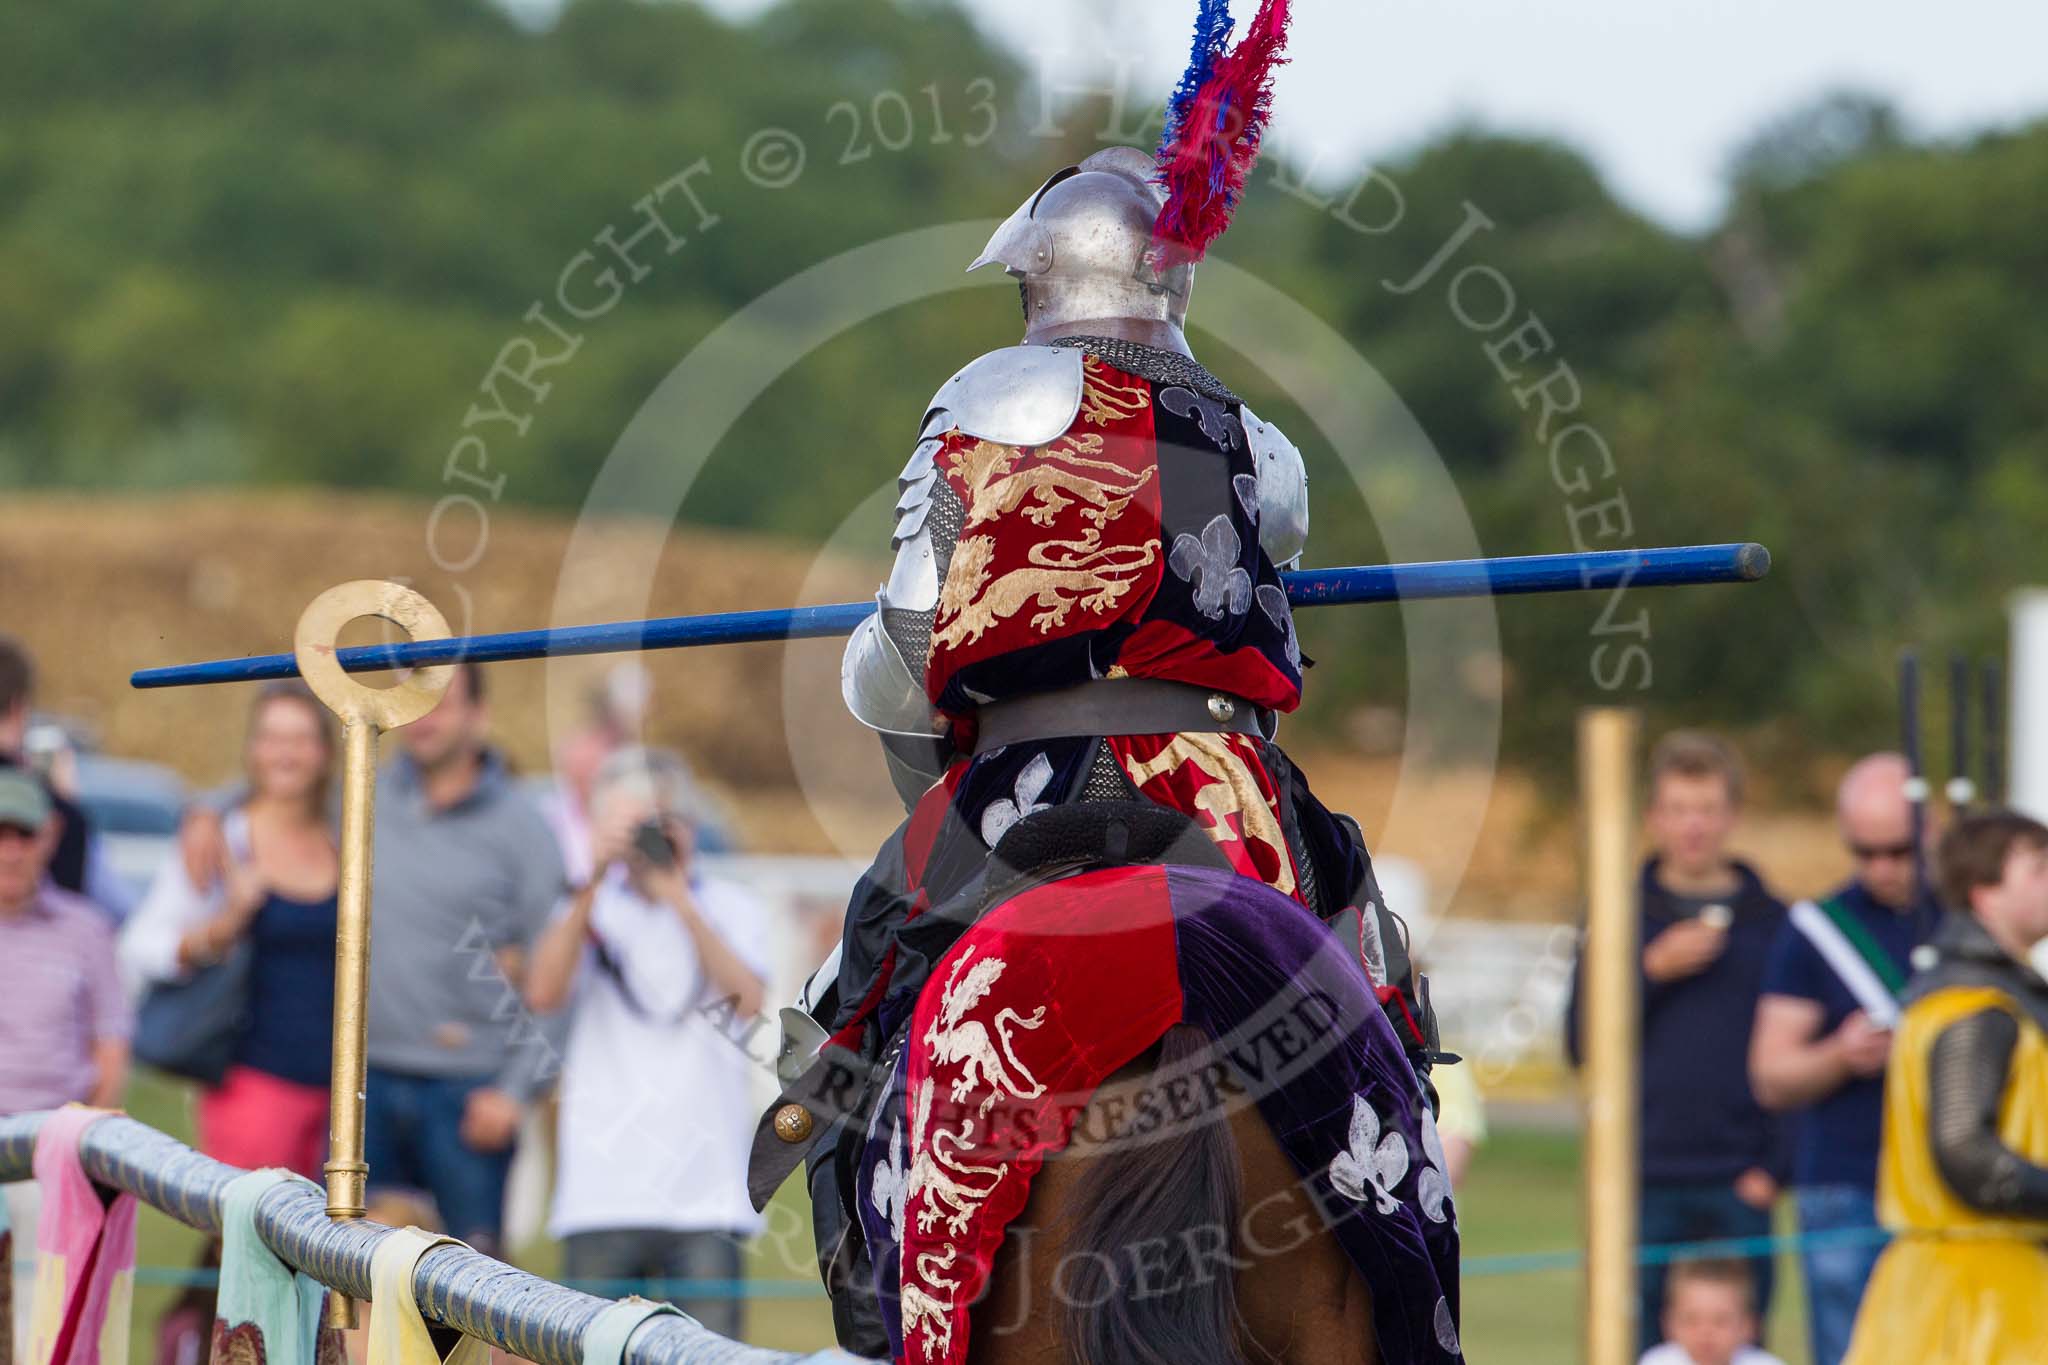 DBPC Polo in the Park 2013 - jousting display by the Knights of Middle England.
Dallas Burston Polo Club, ,
Southam,
Warwickshire,
United Kingdom,
on 01 September 2013 at 15:28, image #472